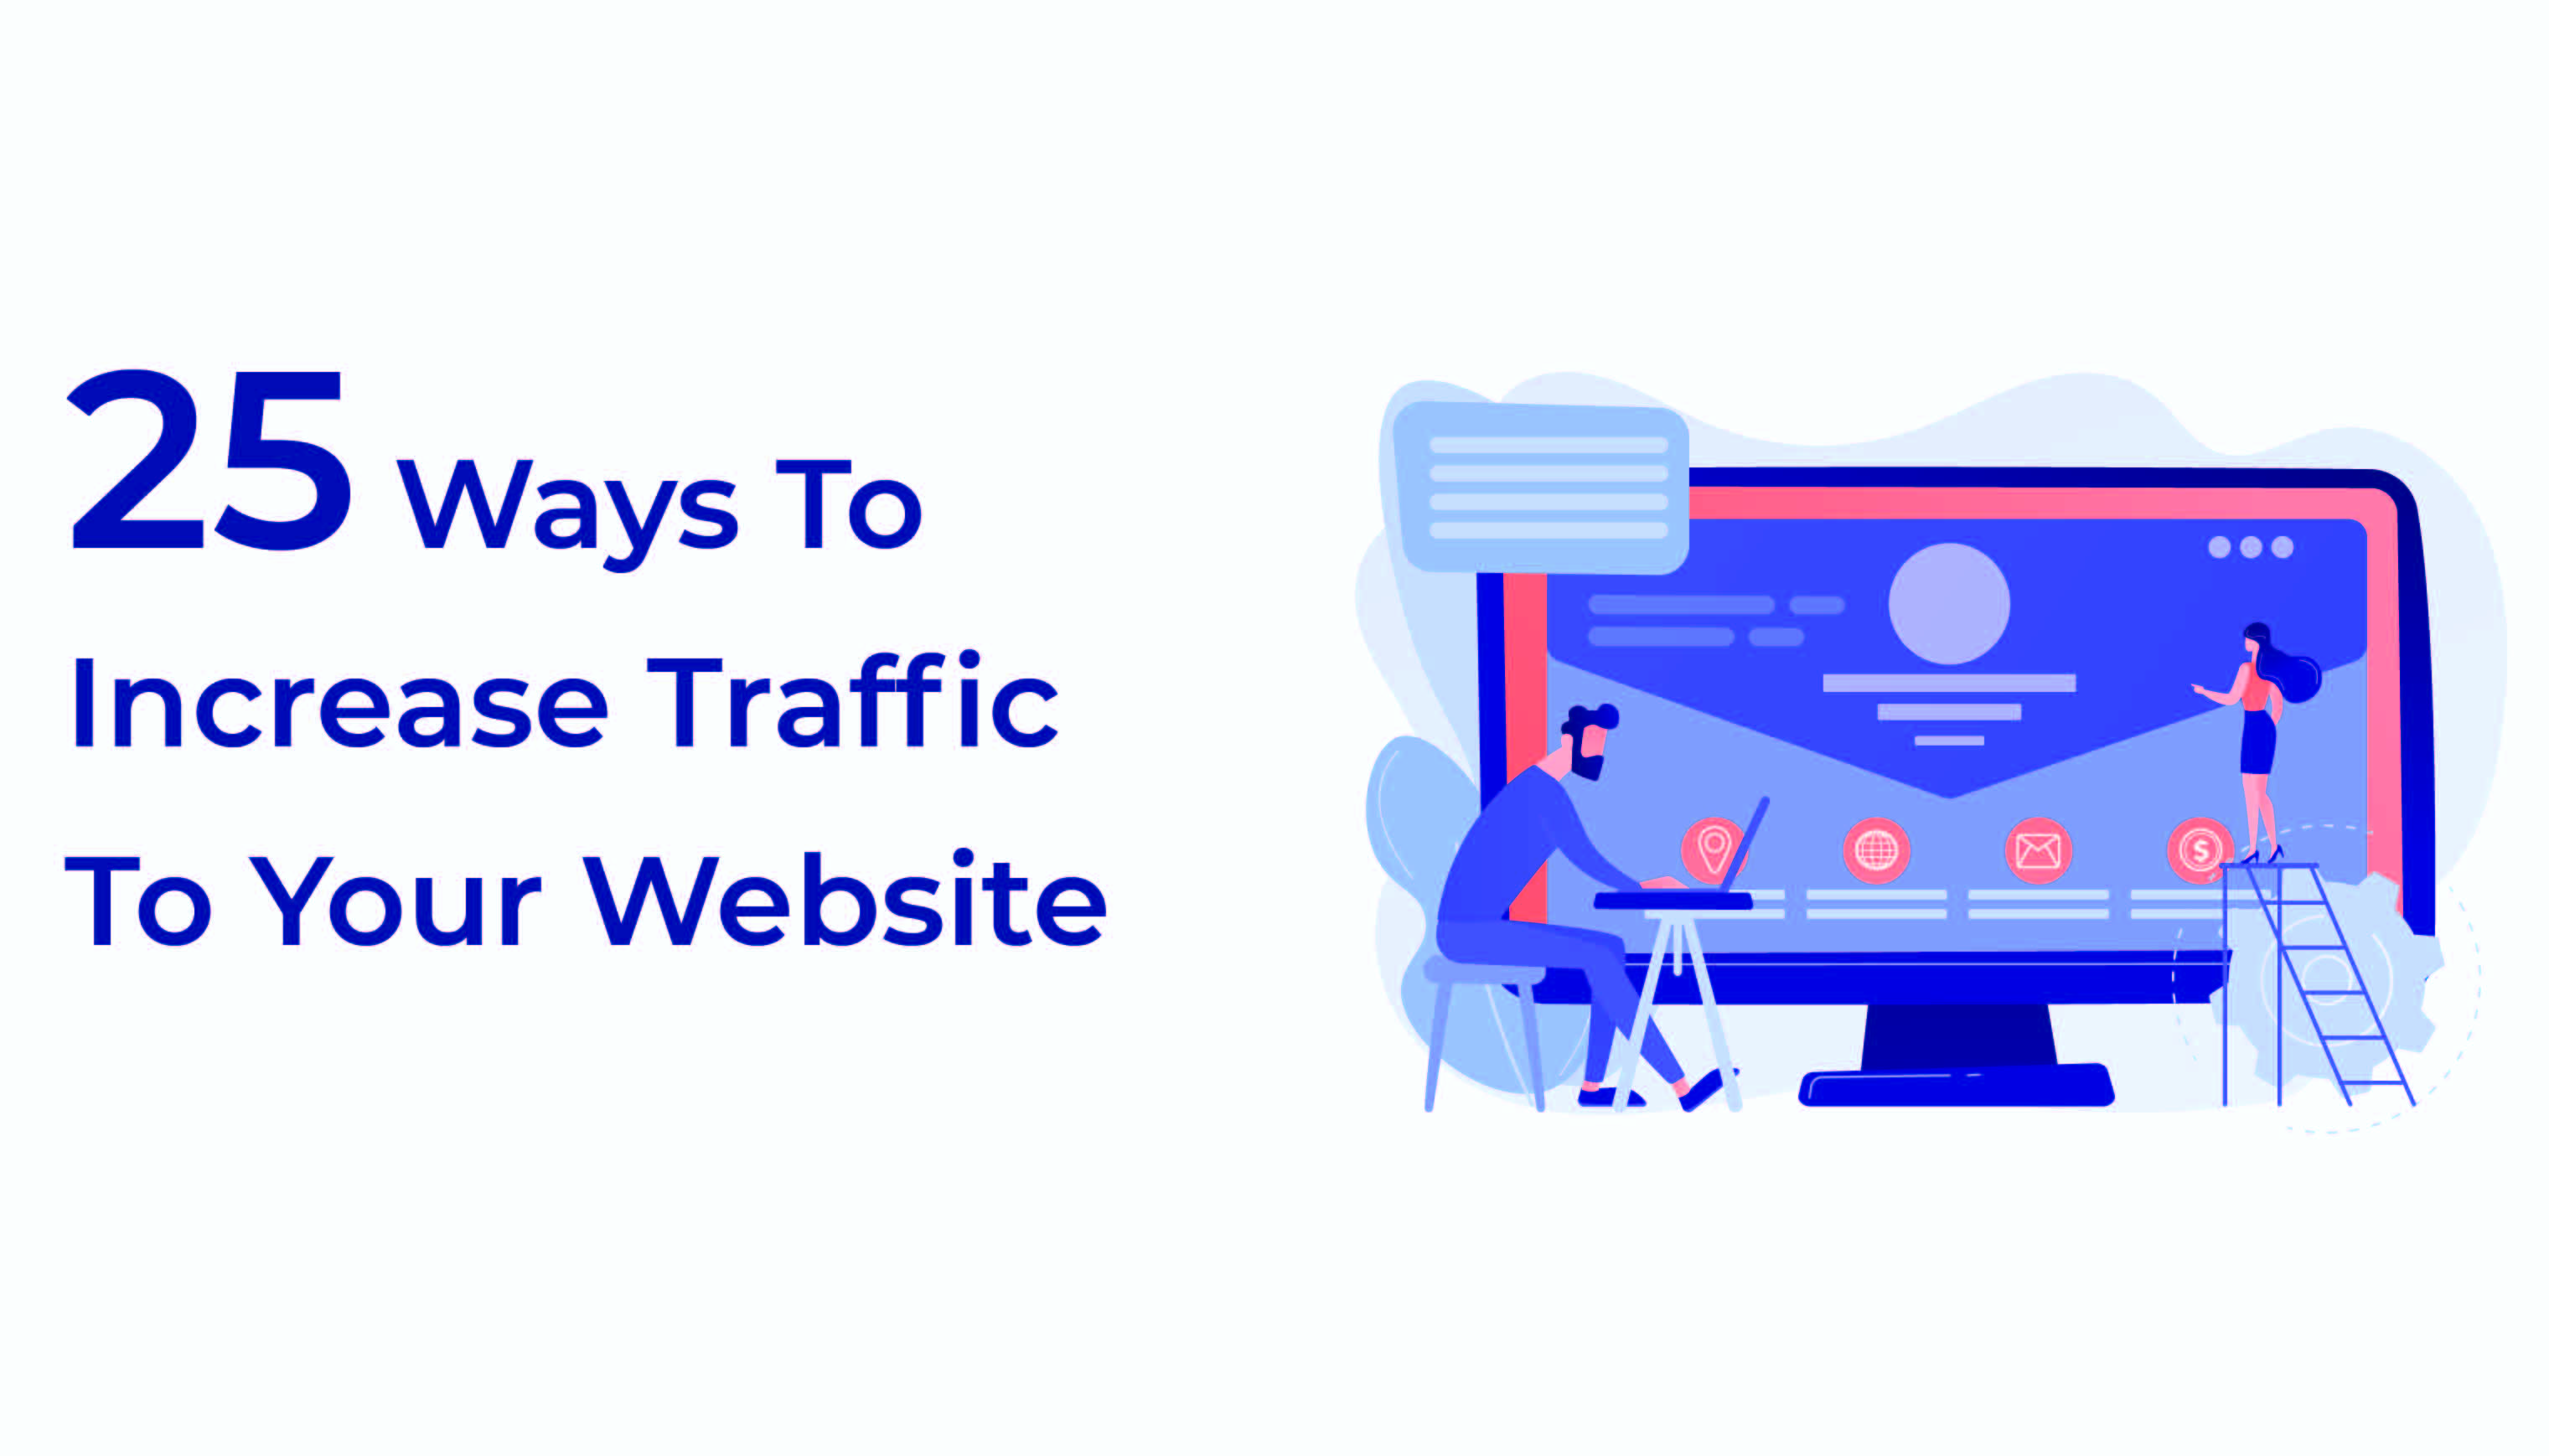 25 Ways To Increase Traffic To Your Website